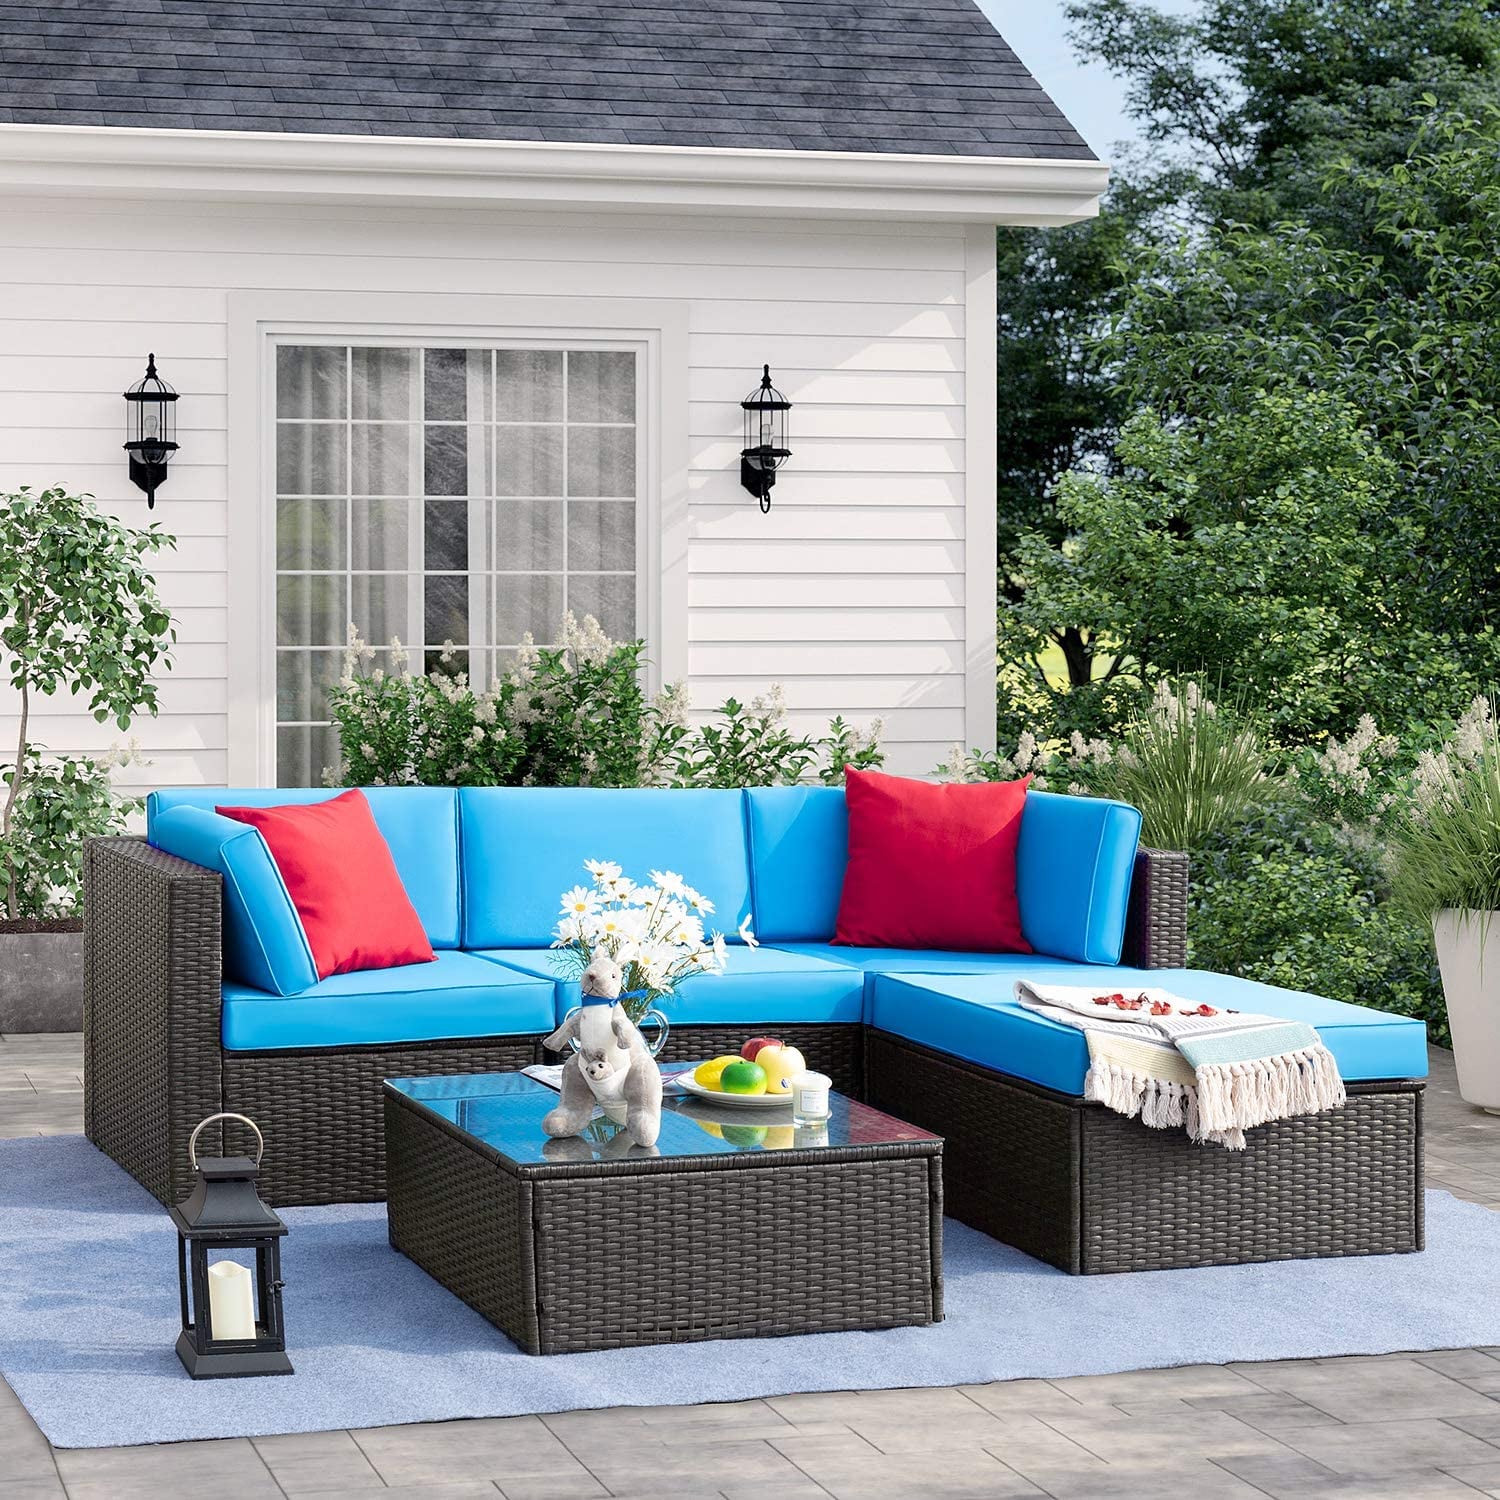 Which patio furniture sets are best for summer? – WAVY.com